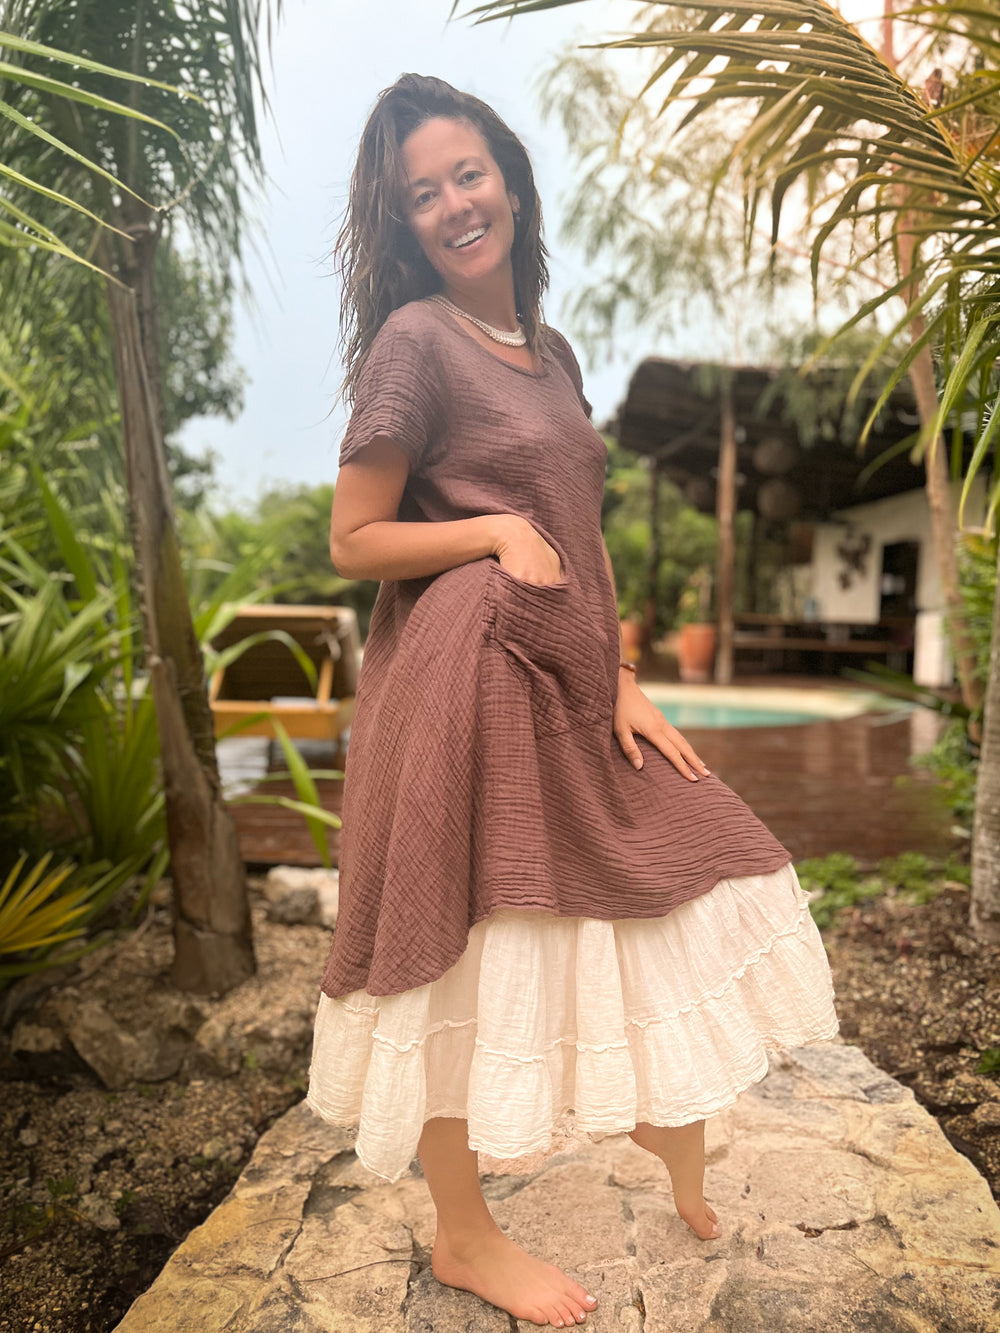 Woman has layered short dress with longer skirt. She is barefoot and smiling.